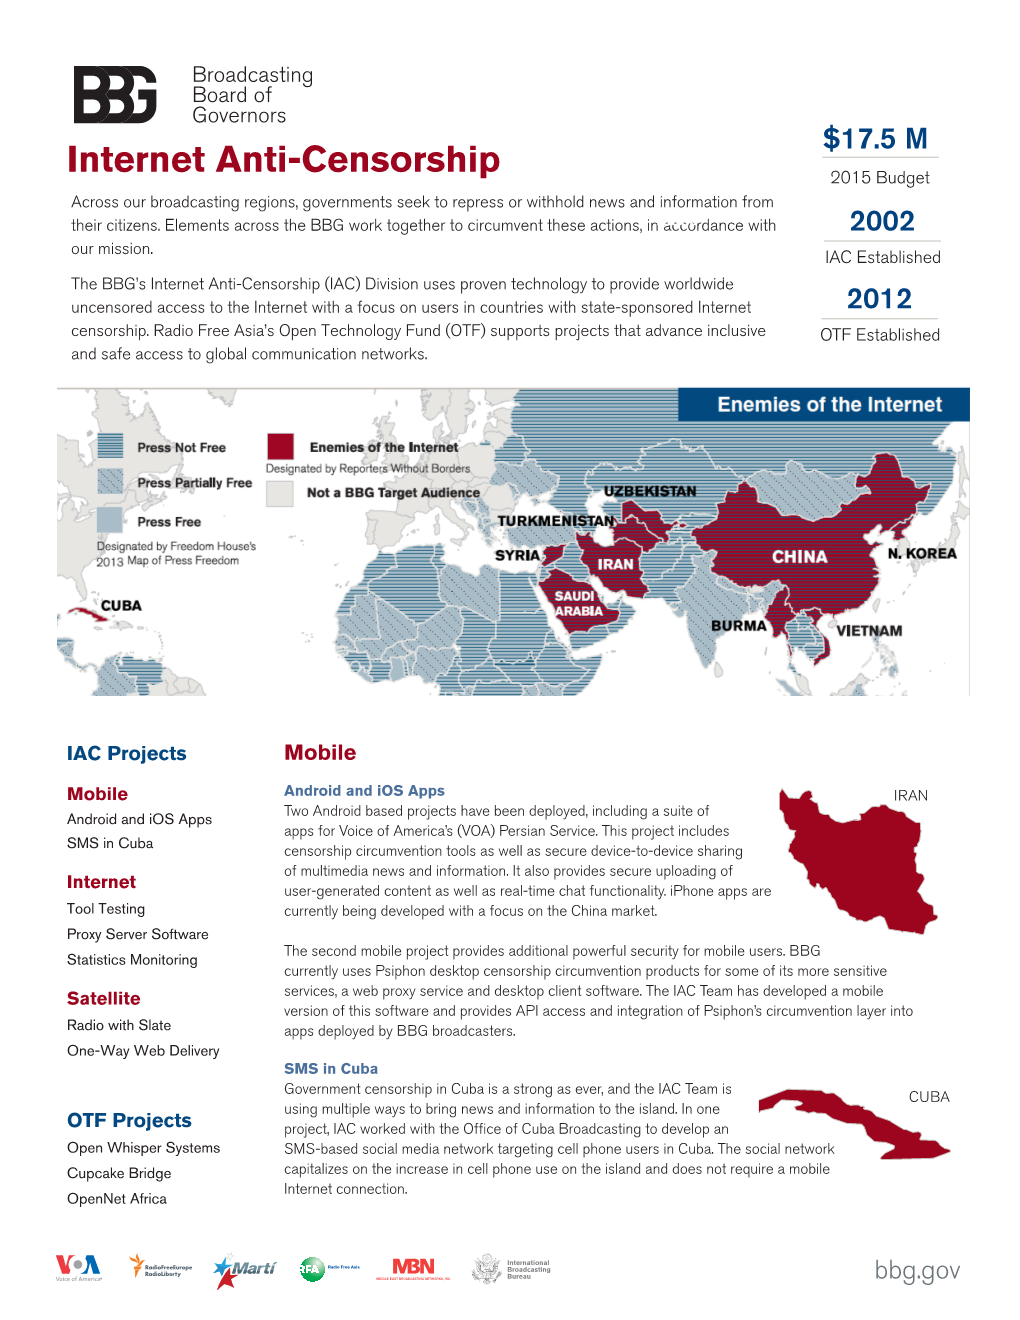 Internet Anti-Censorship 2015 Budget Across Our Broadcasting Regions, Governments Seek to Repress Or Withhold News and Information from Their Citizens